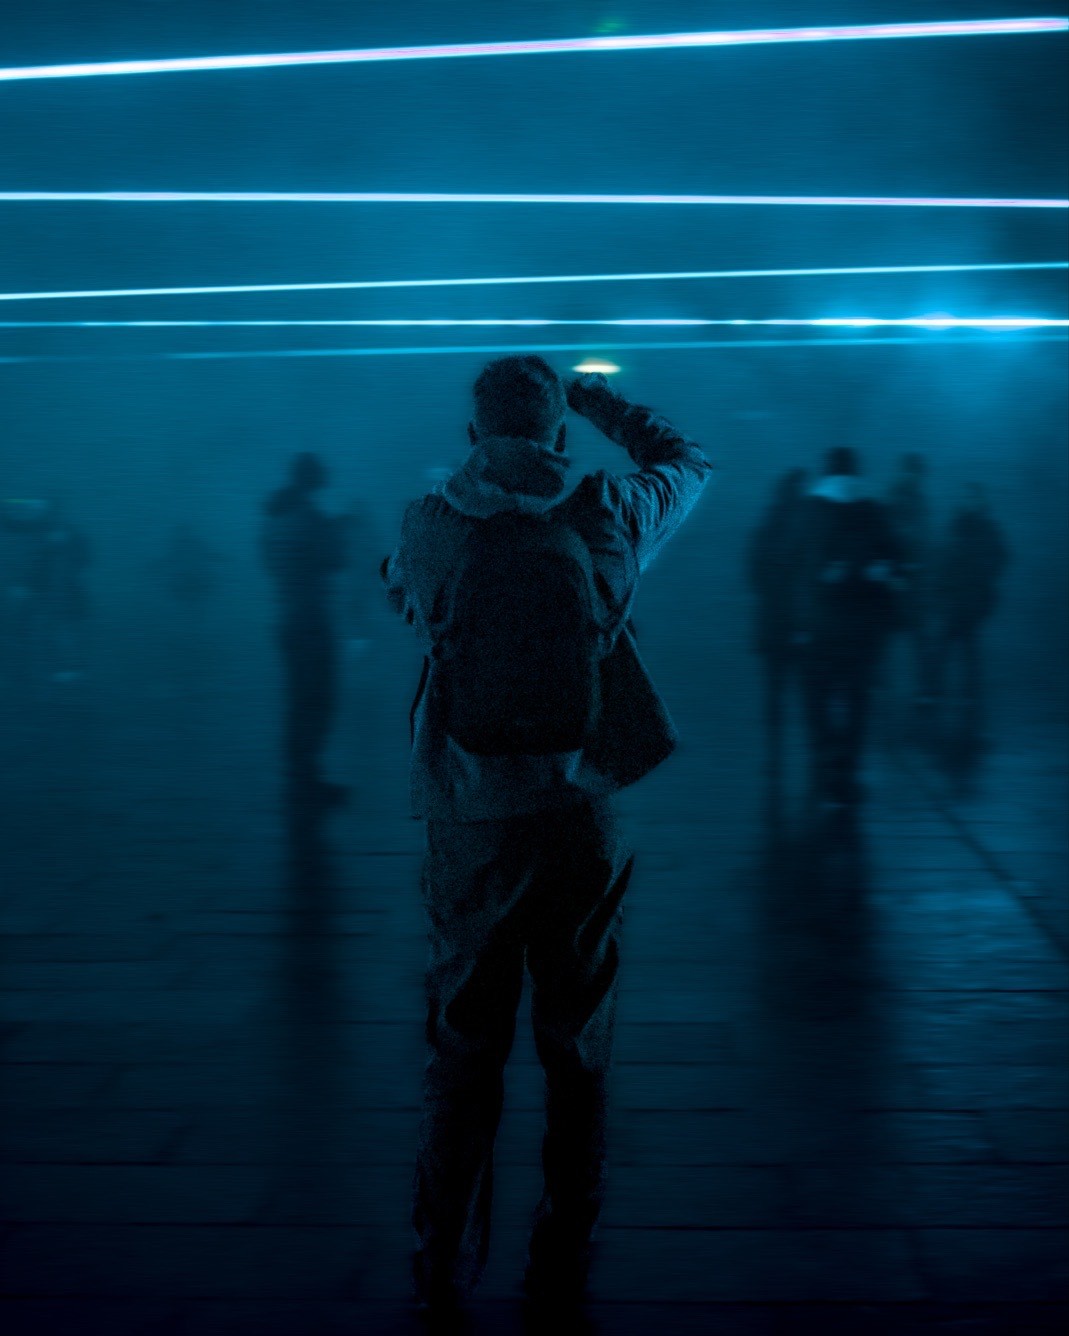 This image features a person seen from the back, standing in a dimly lit space illuminated by horizontal neon blue lights. The person is holding what appears to be a camera, taking a photo. Shadows and silhouettes of other individuals are visible in the background, suggesting a public or social setting.